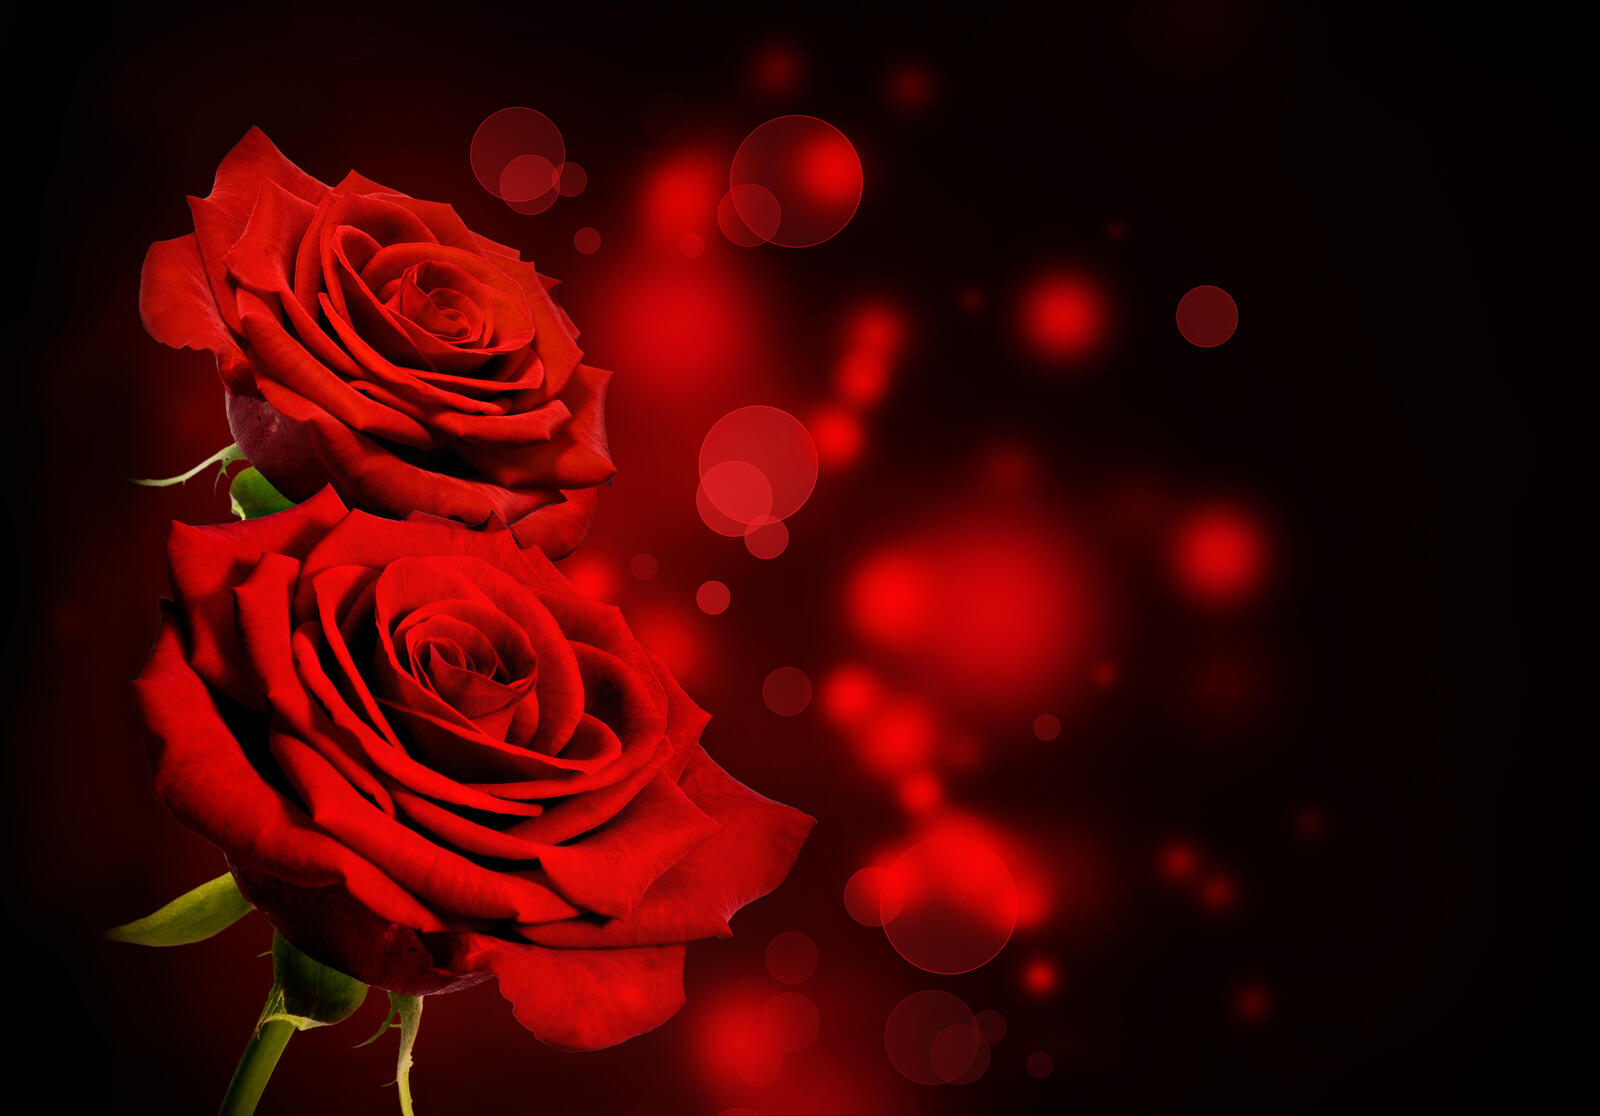 Wallpapers rose red bouquet red roses on the desktop